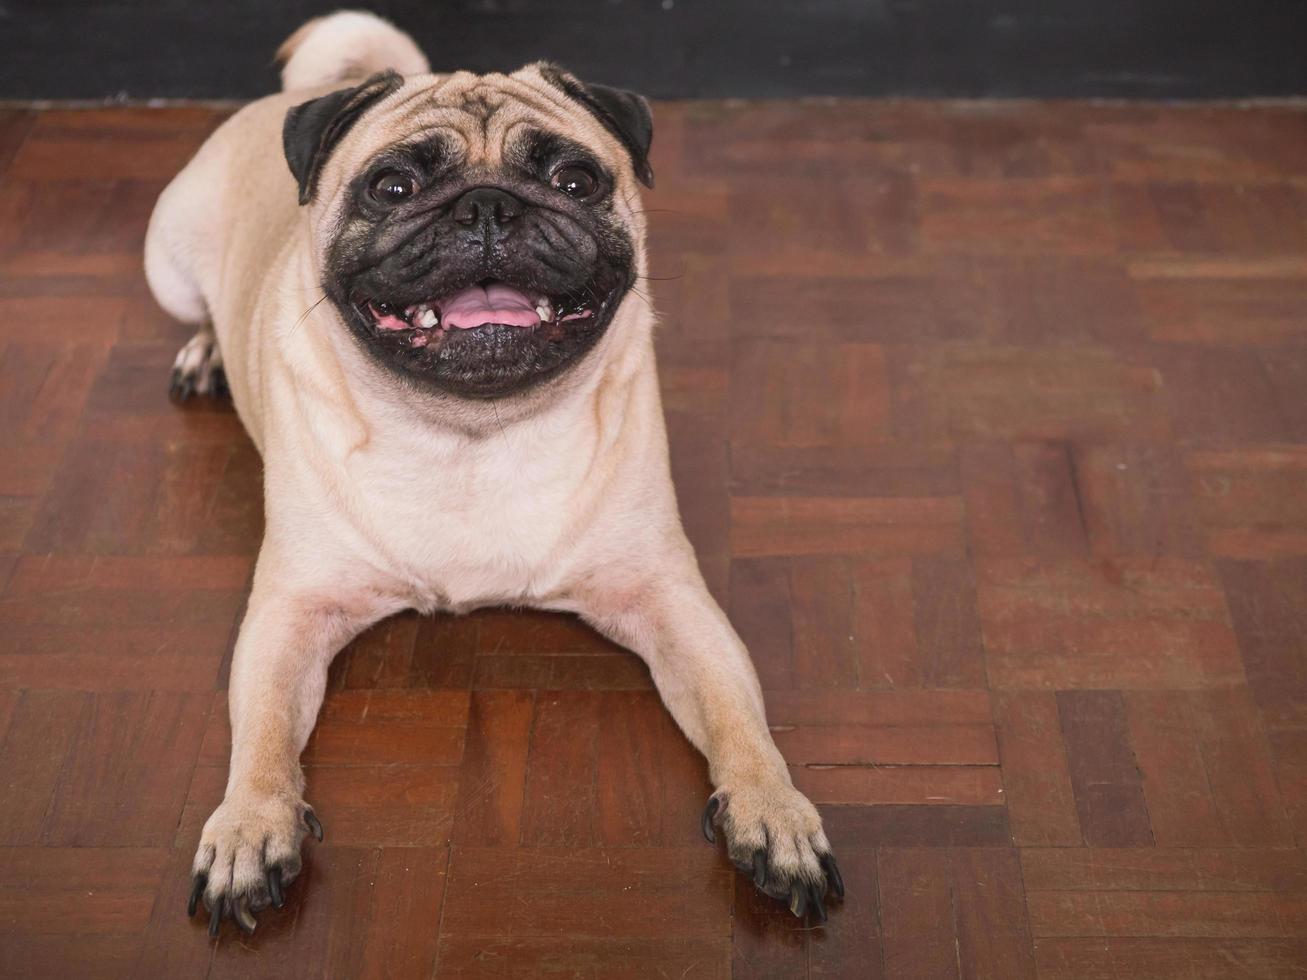 Adorable pug dog lying on floor at home, 3 year old, looking at the camera photo